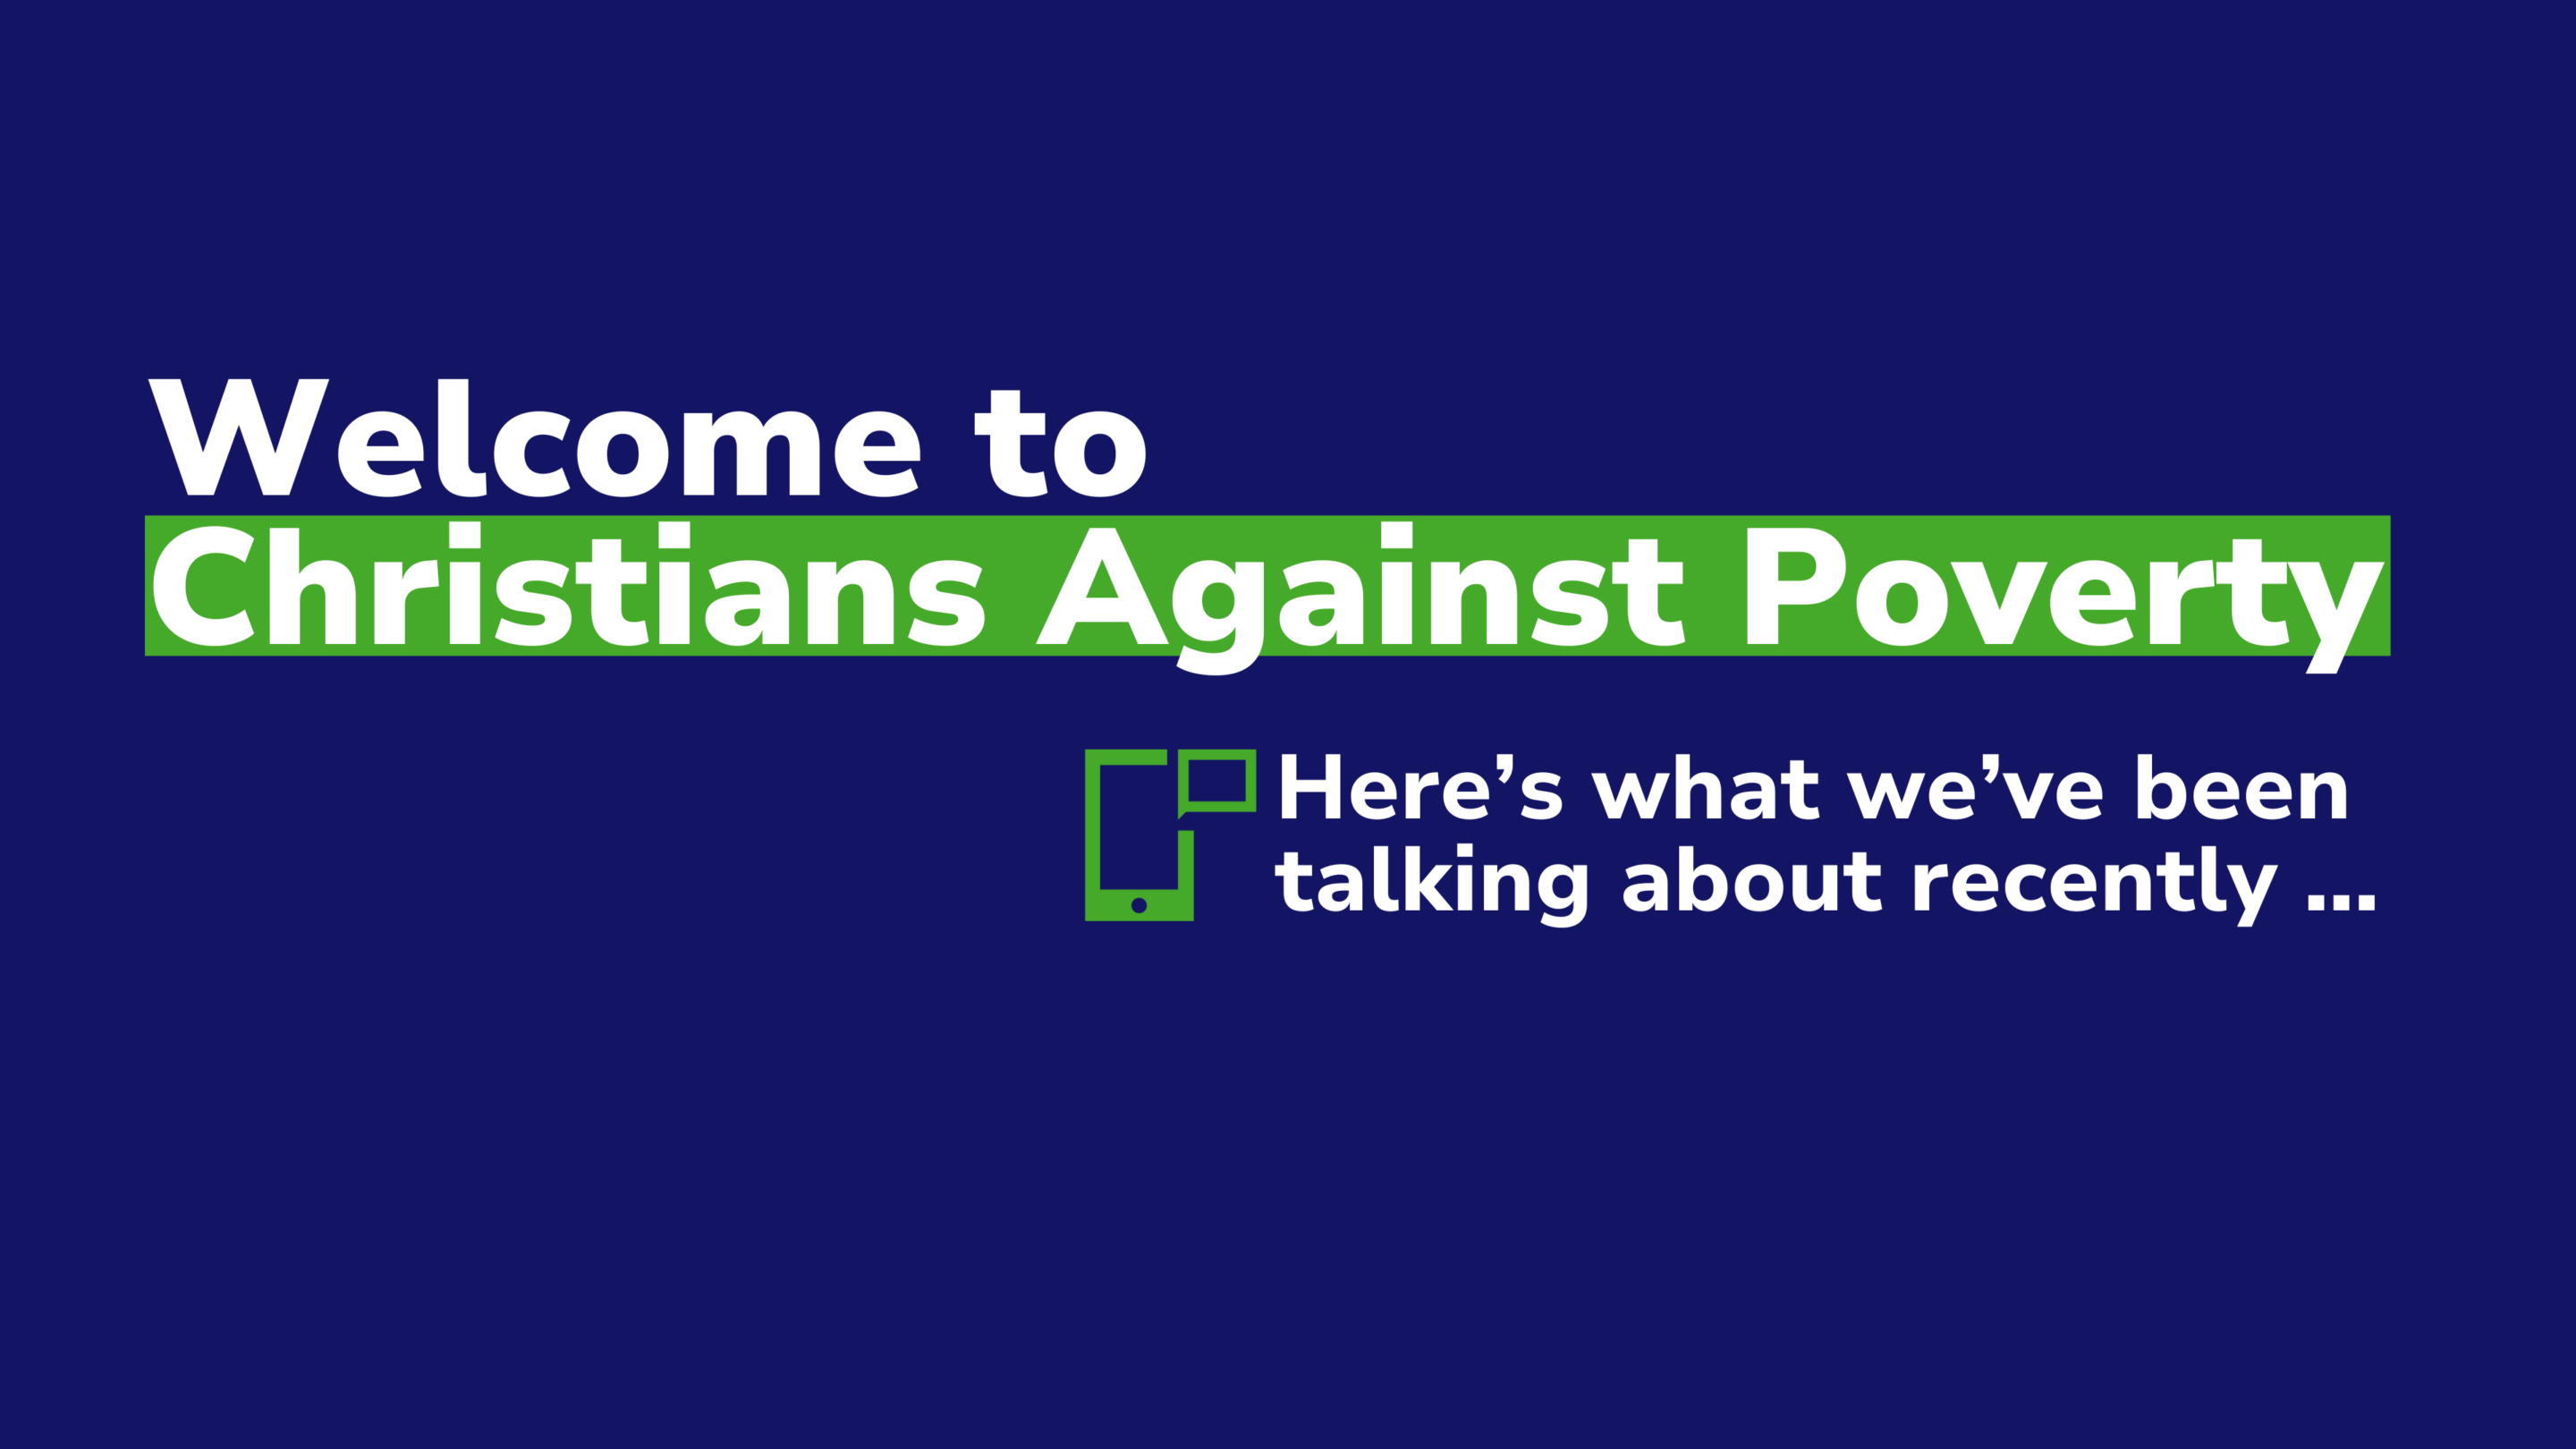 welcome to christians against poverty, here’s what we’ve been talking about recently